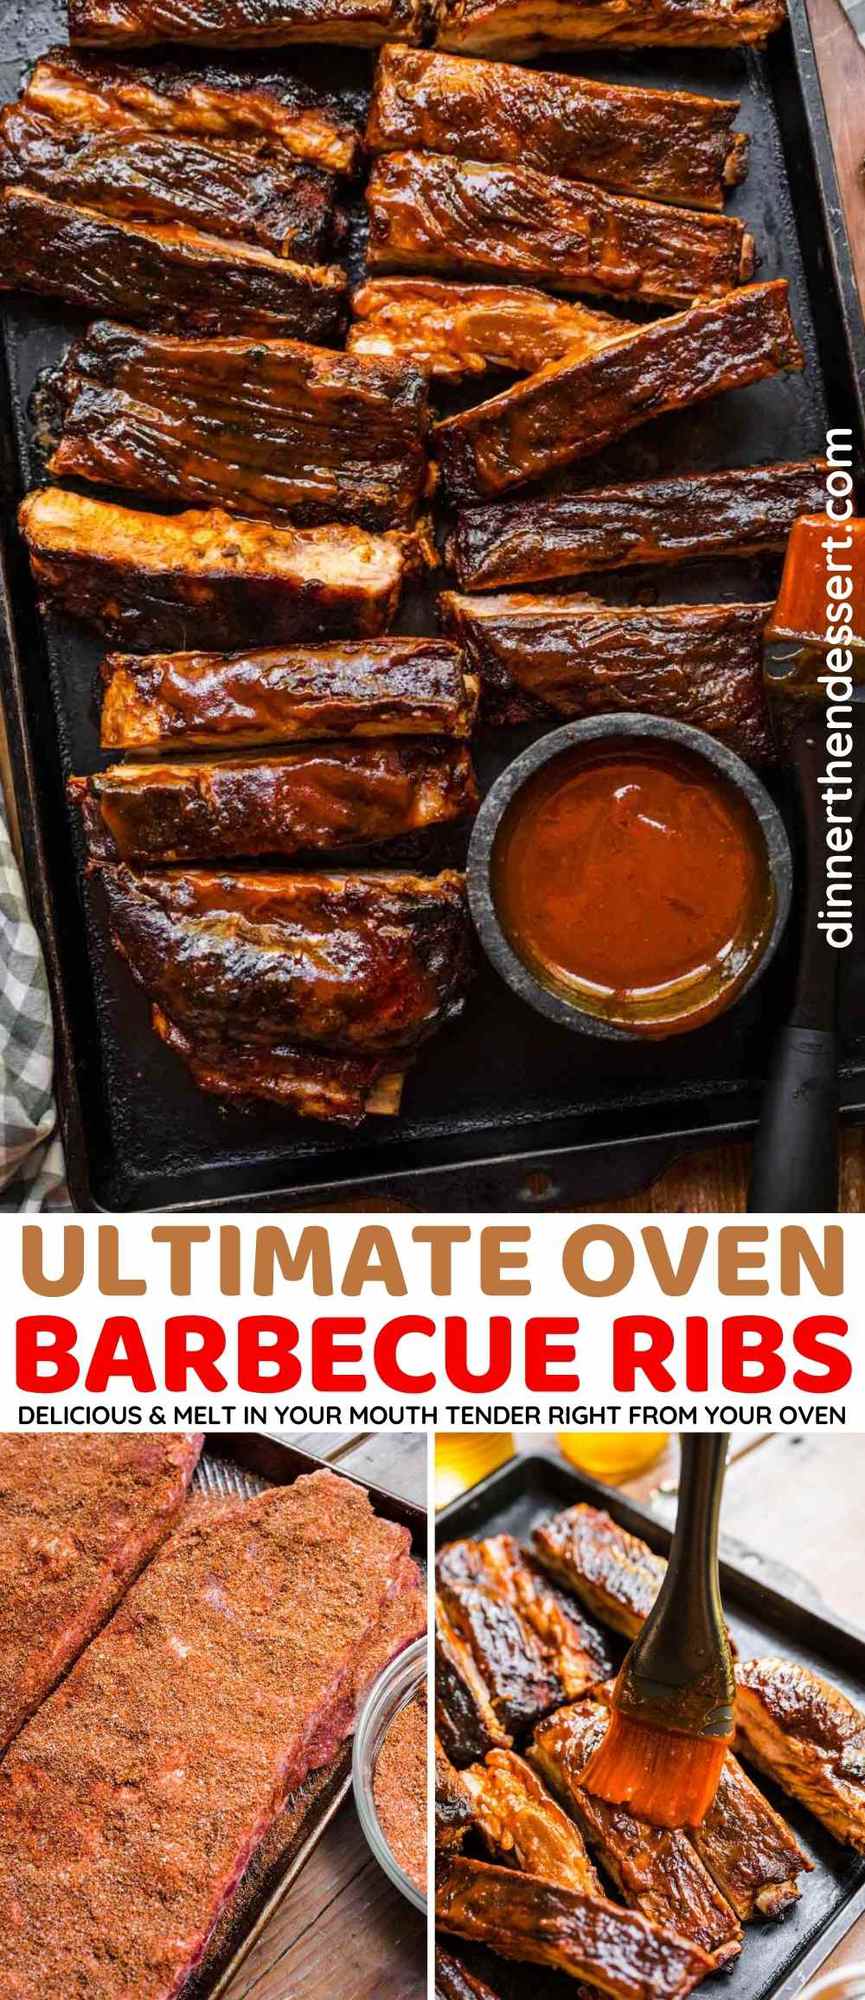 Ultimate Oven Barbecue Ribs on serving trayUltimate Oven Barbecue Ribs collage